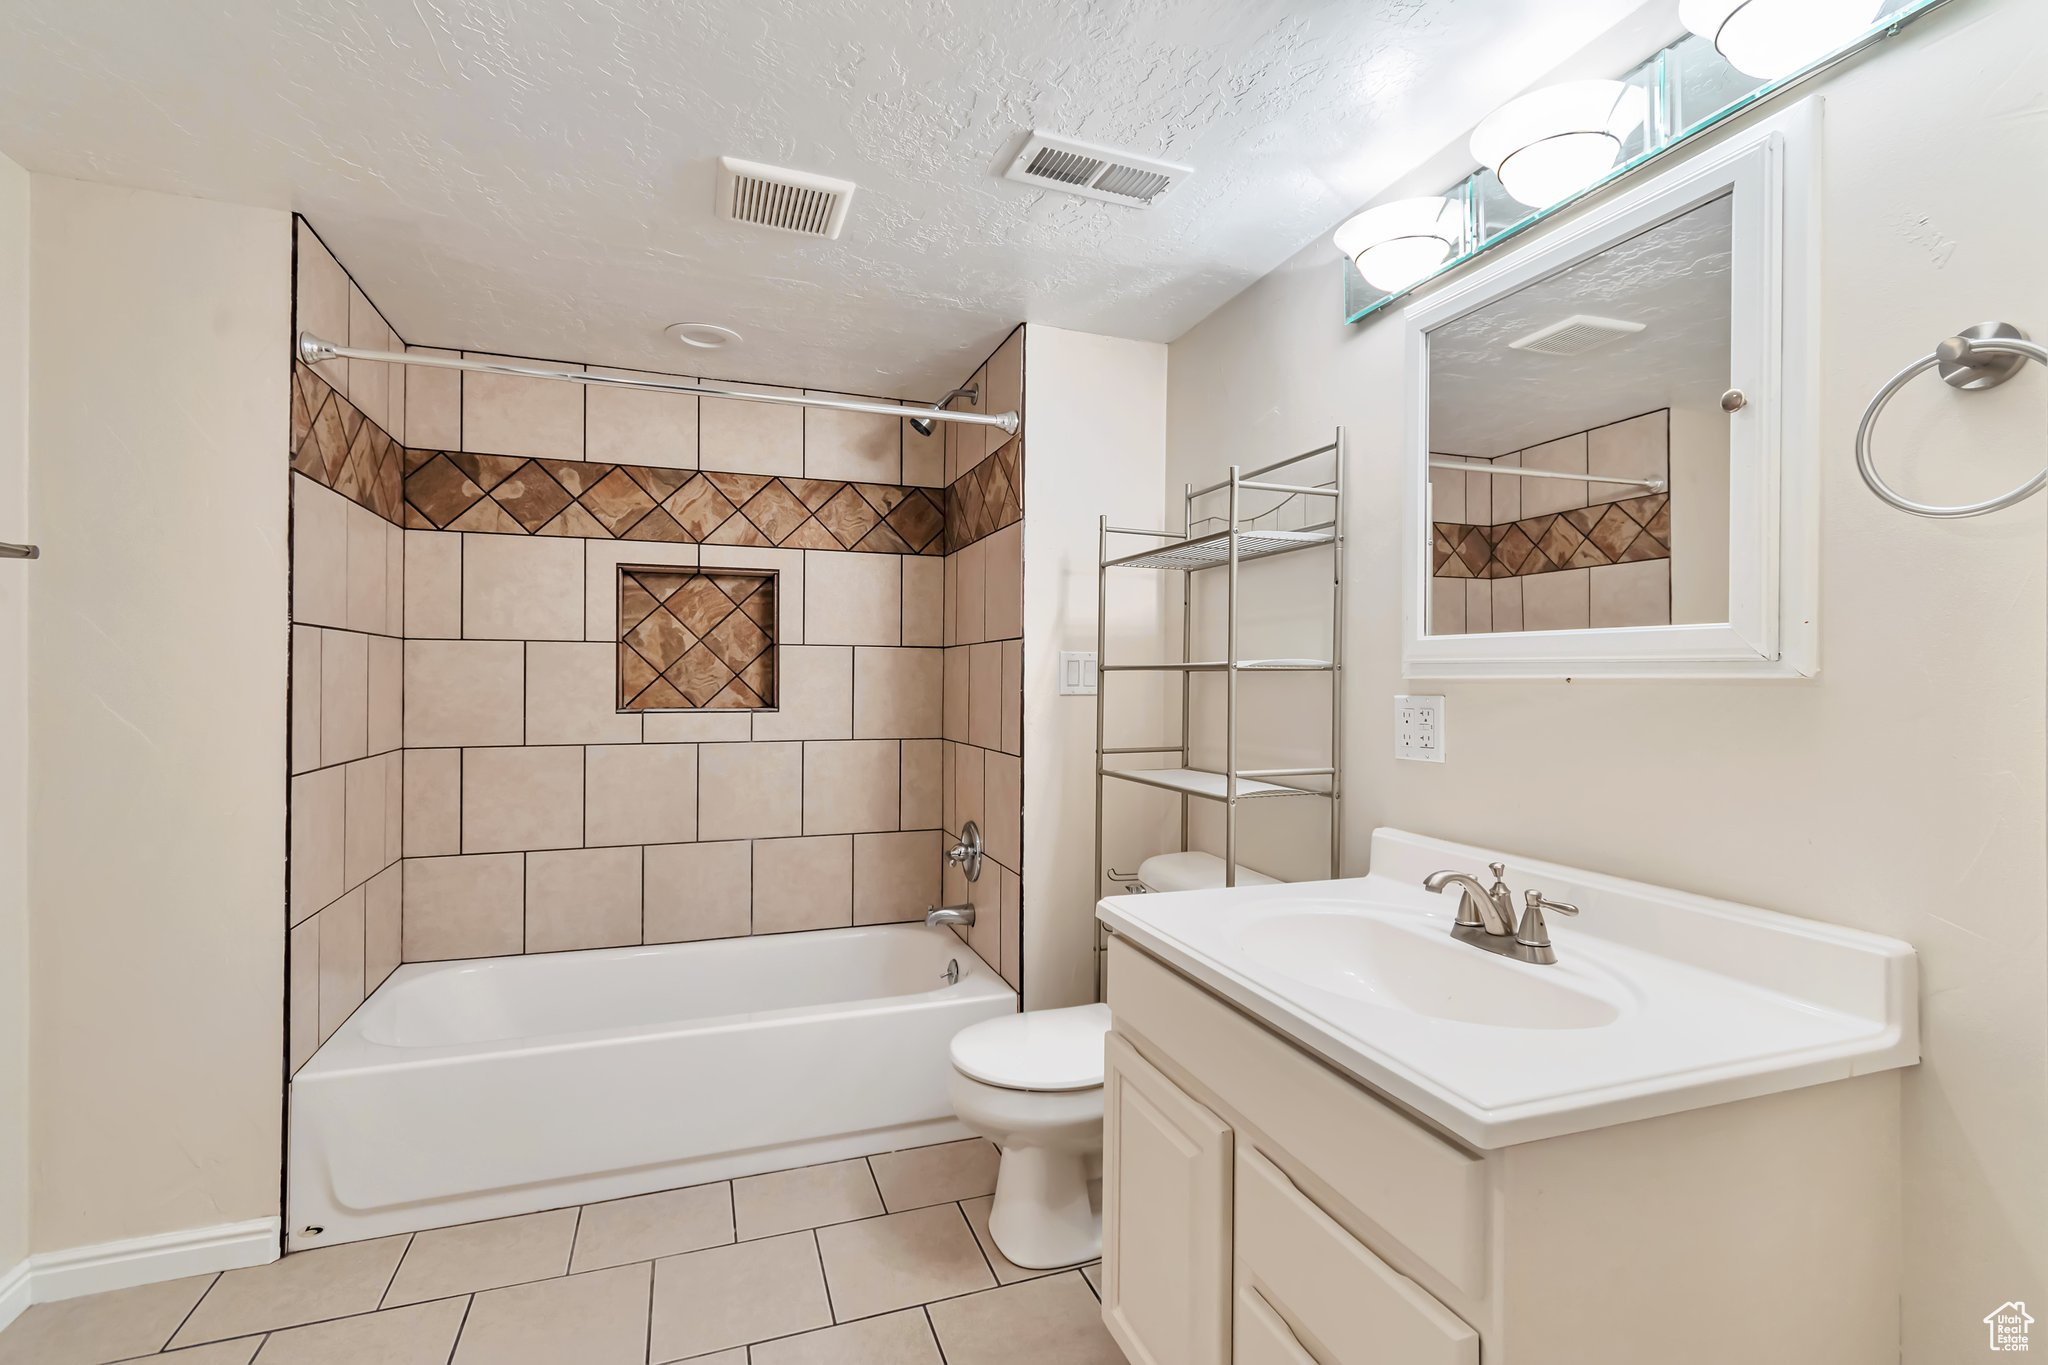 Full bathroom with tiled shower / bath combo, tile floors, toilet, over the toilet storage, mirror cabinet storage, and a textured ceiling.